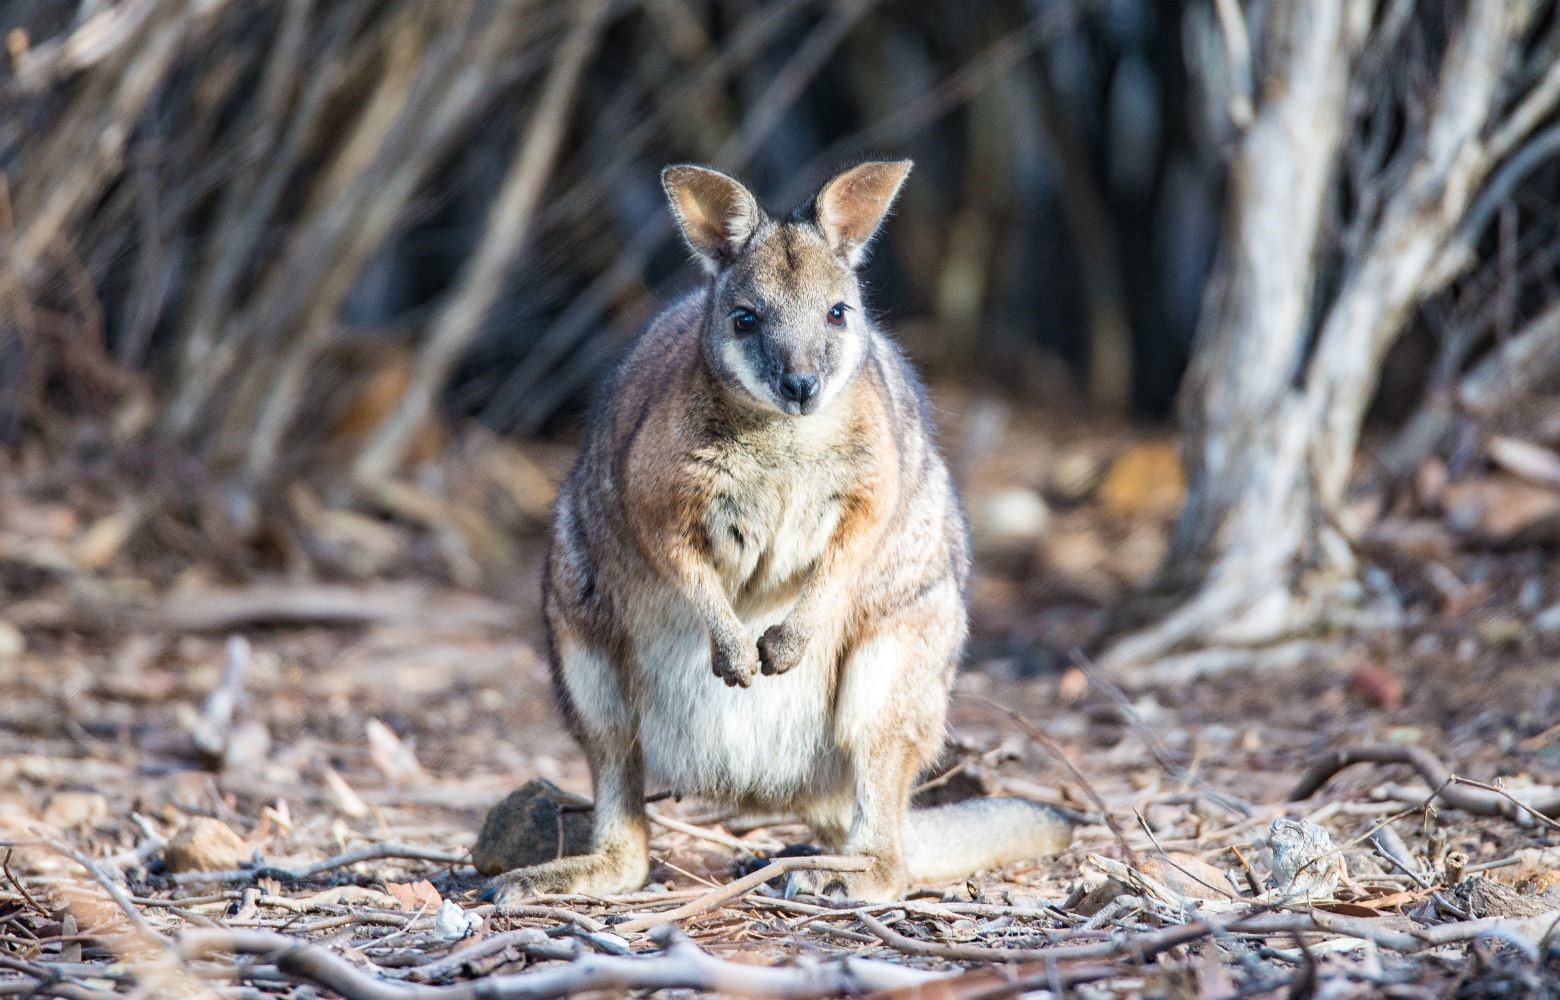 Wallaby journal